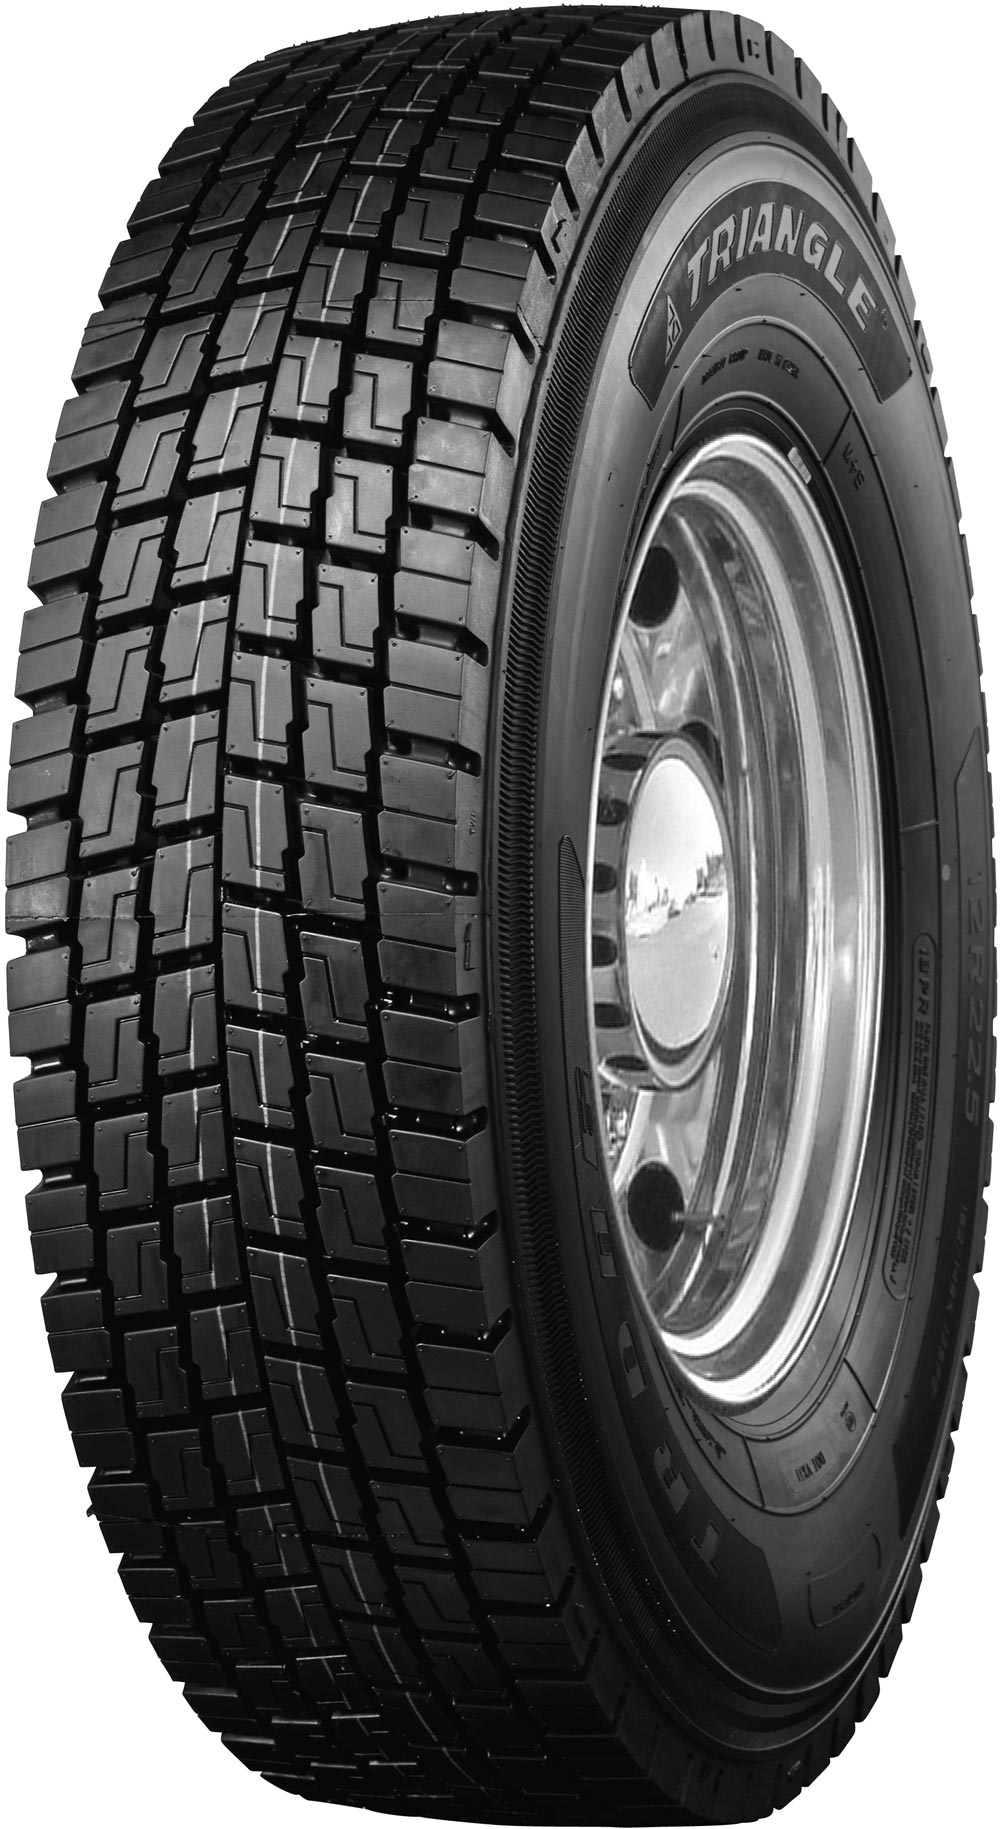 product_type-heavy_tires Triangle TRD06 16PR 295/80 R22.5 152L